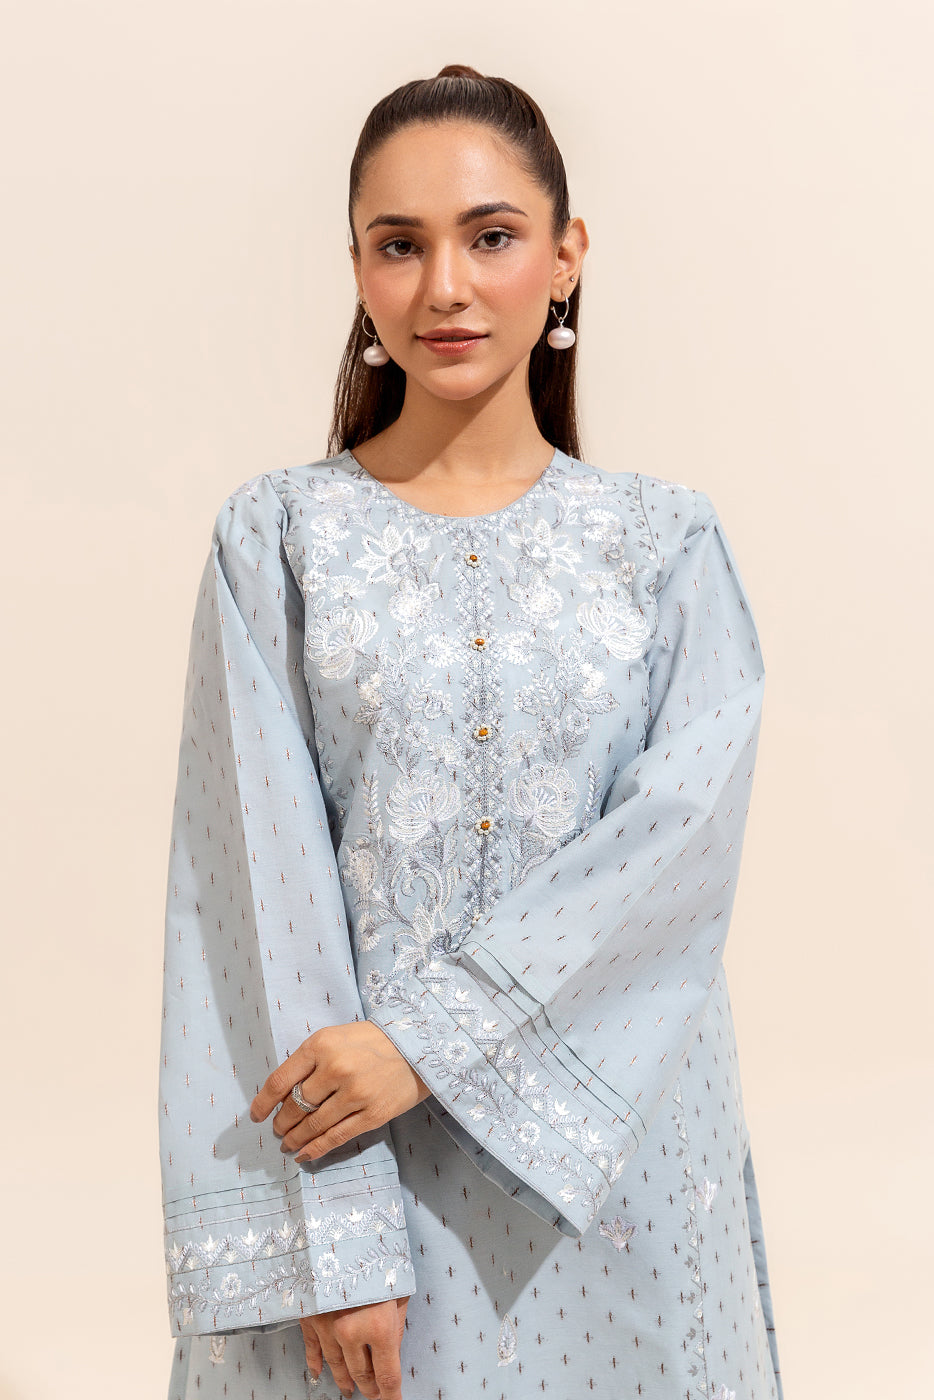 2 PIECE EMBROIDERED JACQUARD SUIT-ICEBERG VINES (UNSTITCHED)